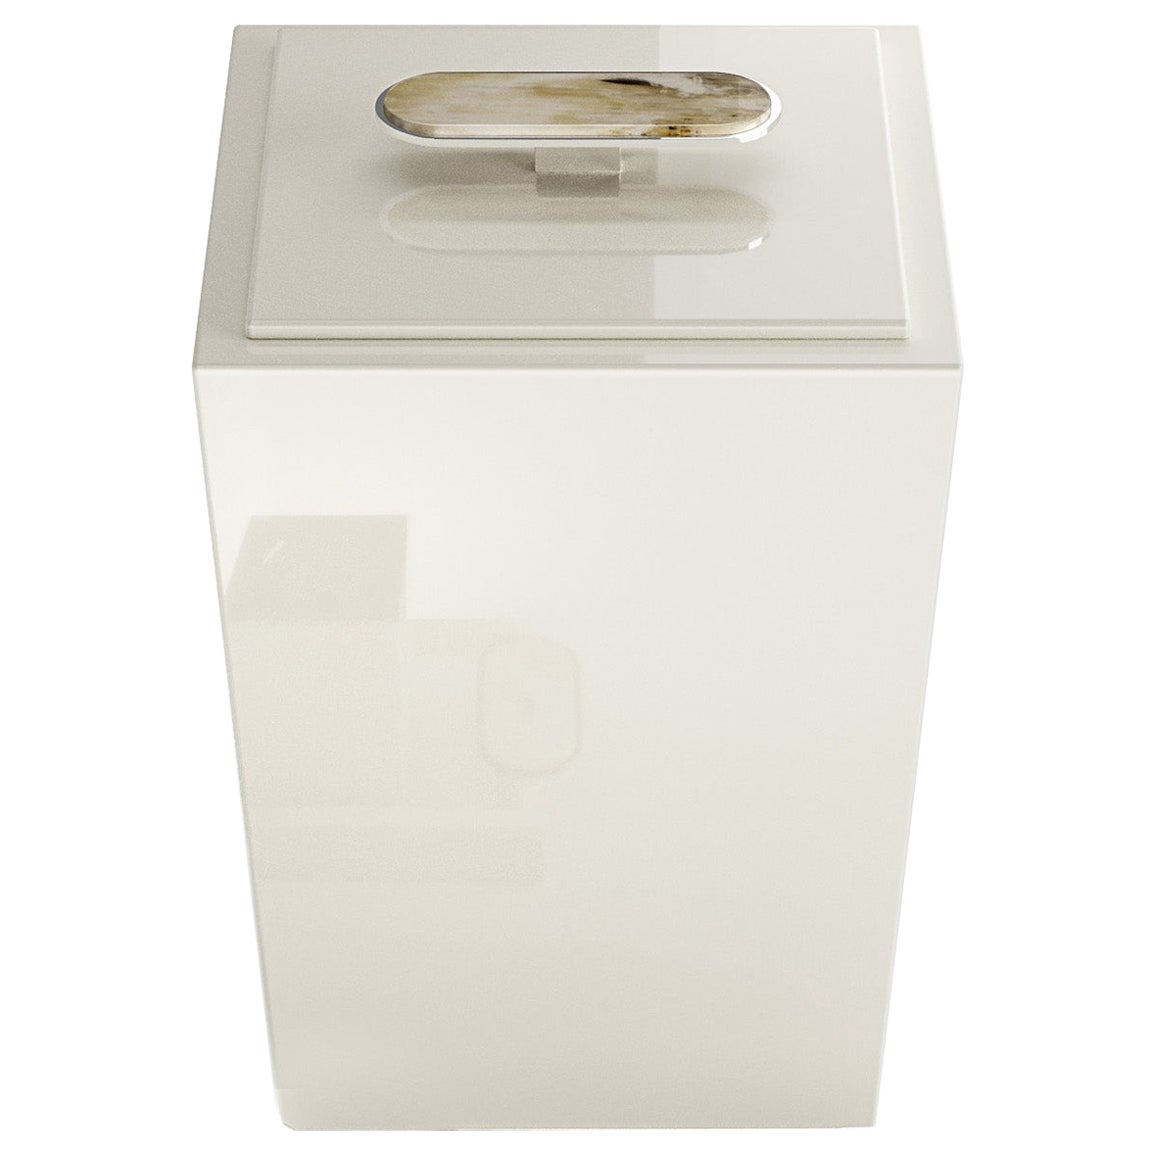 Bicco Waste Paper Basket in Ivory Lacquered Wood and Corno Italiano, Mod. 2425